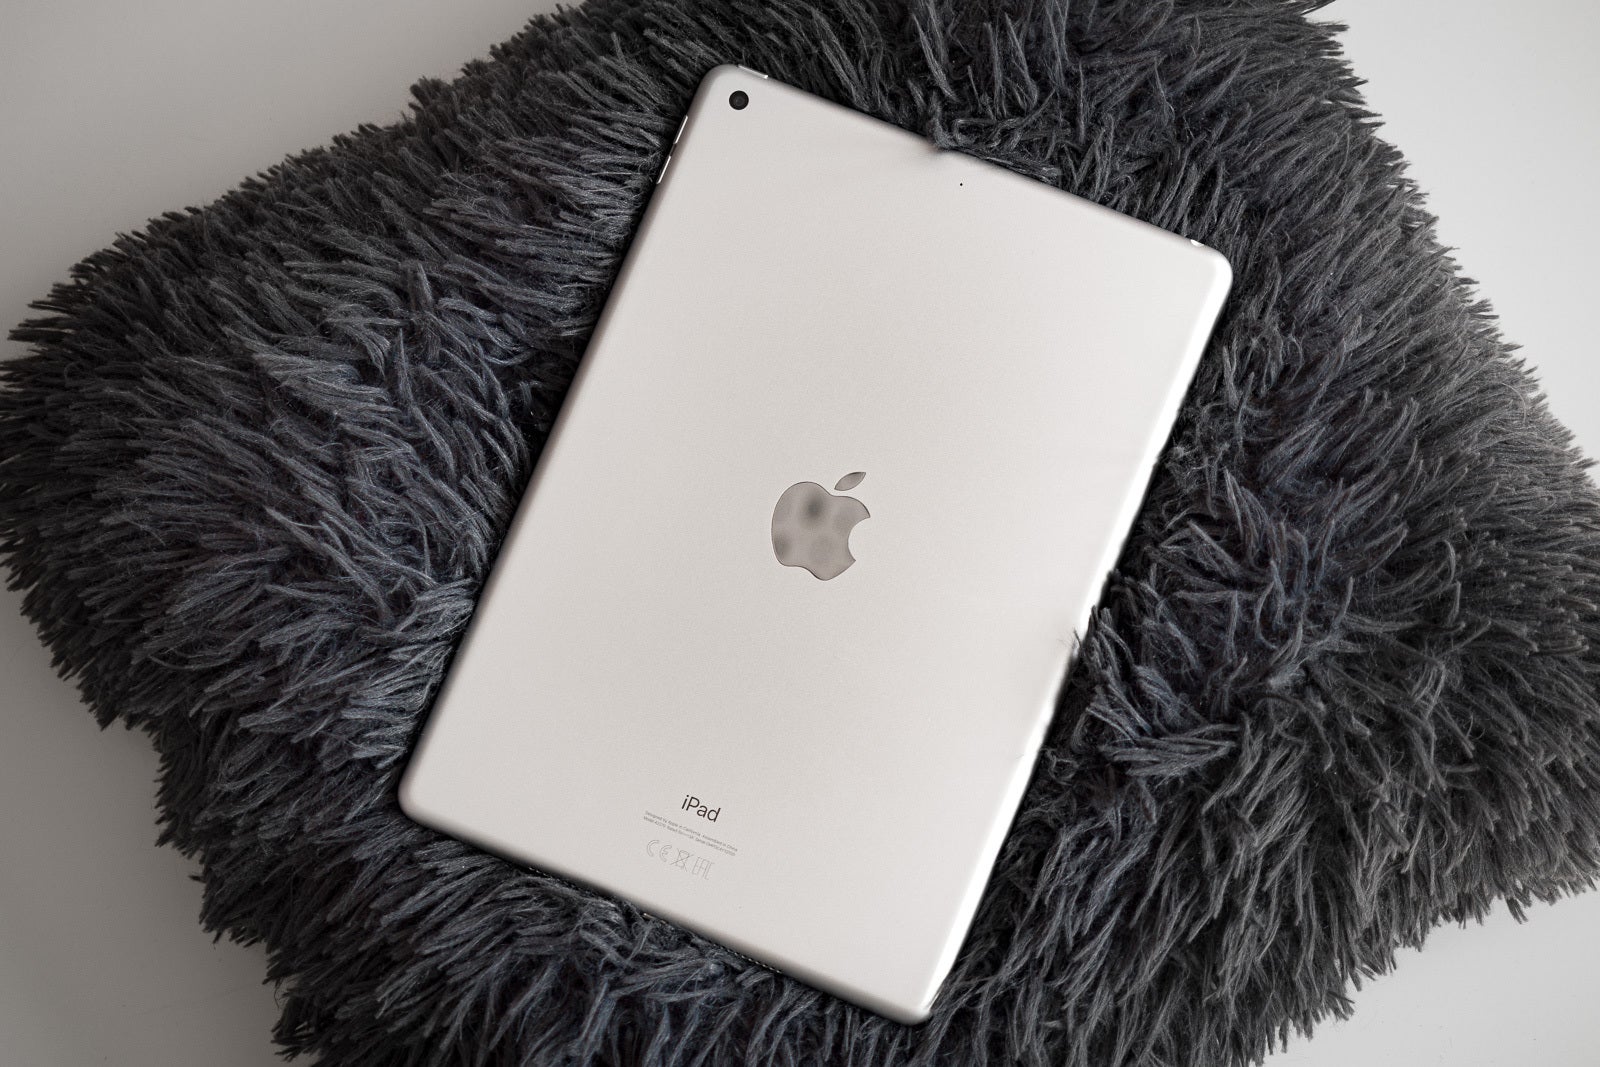 Apple's basic iPad is by far the world's most popular tablet